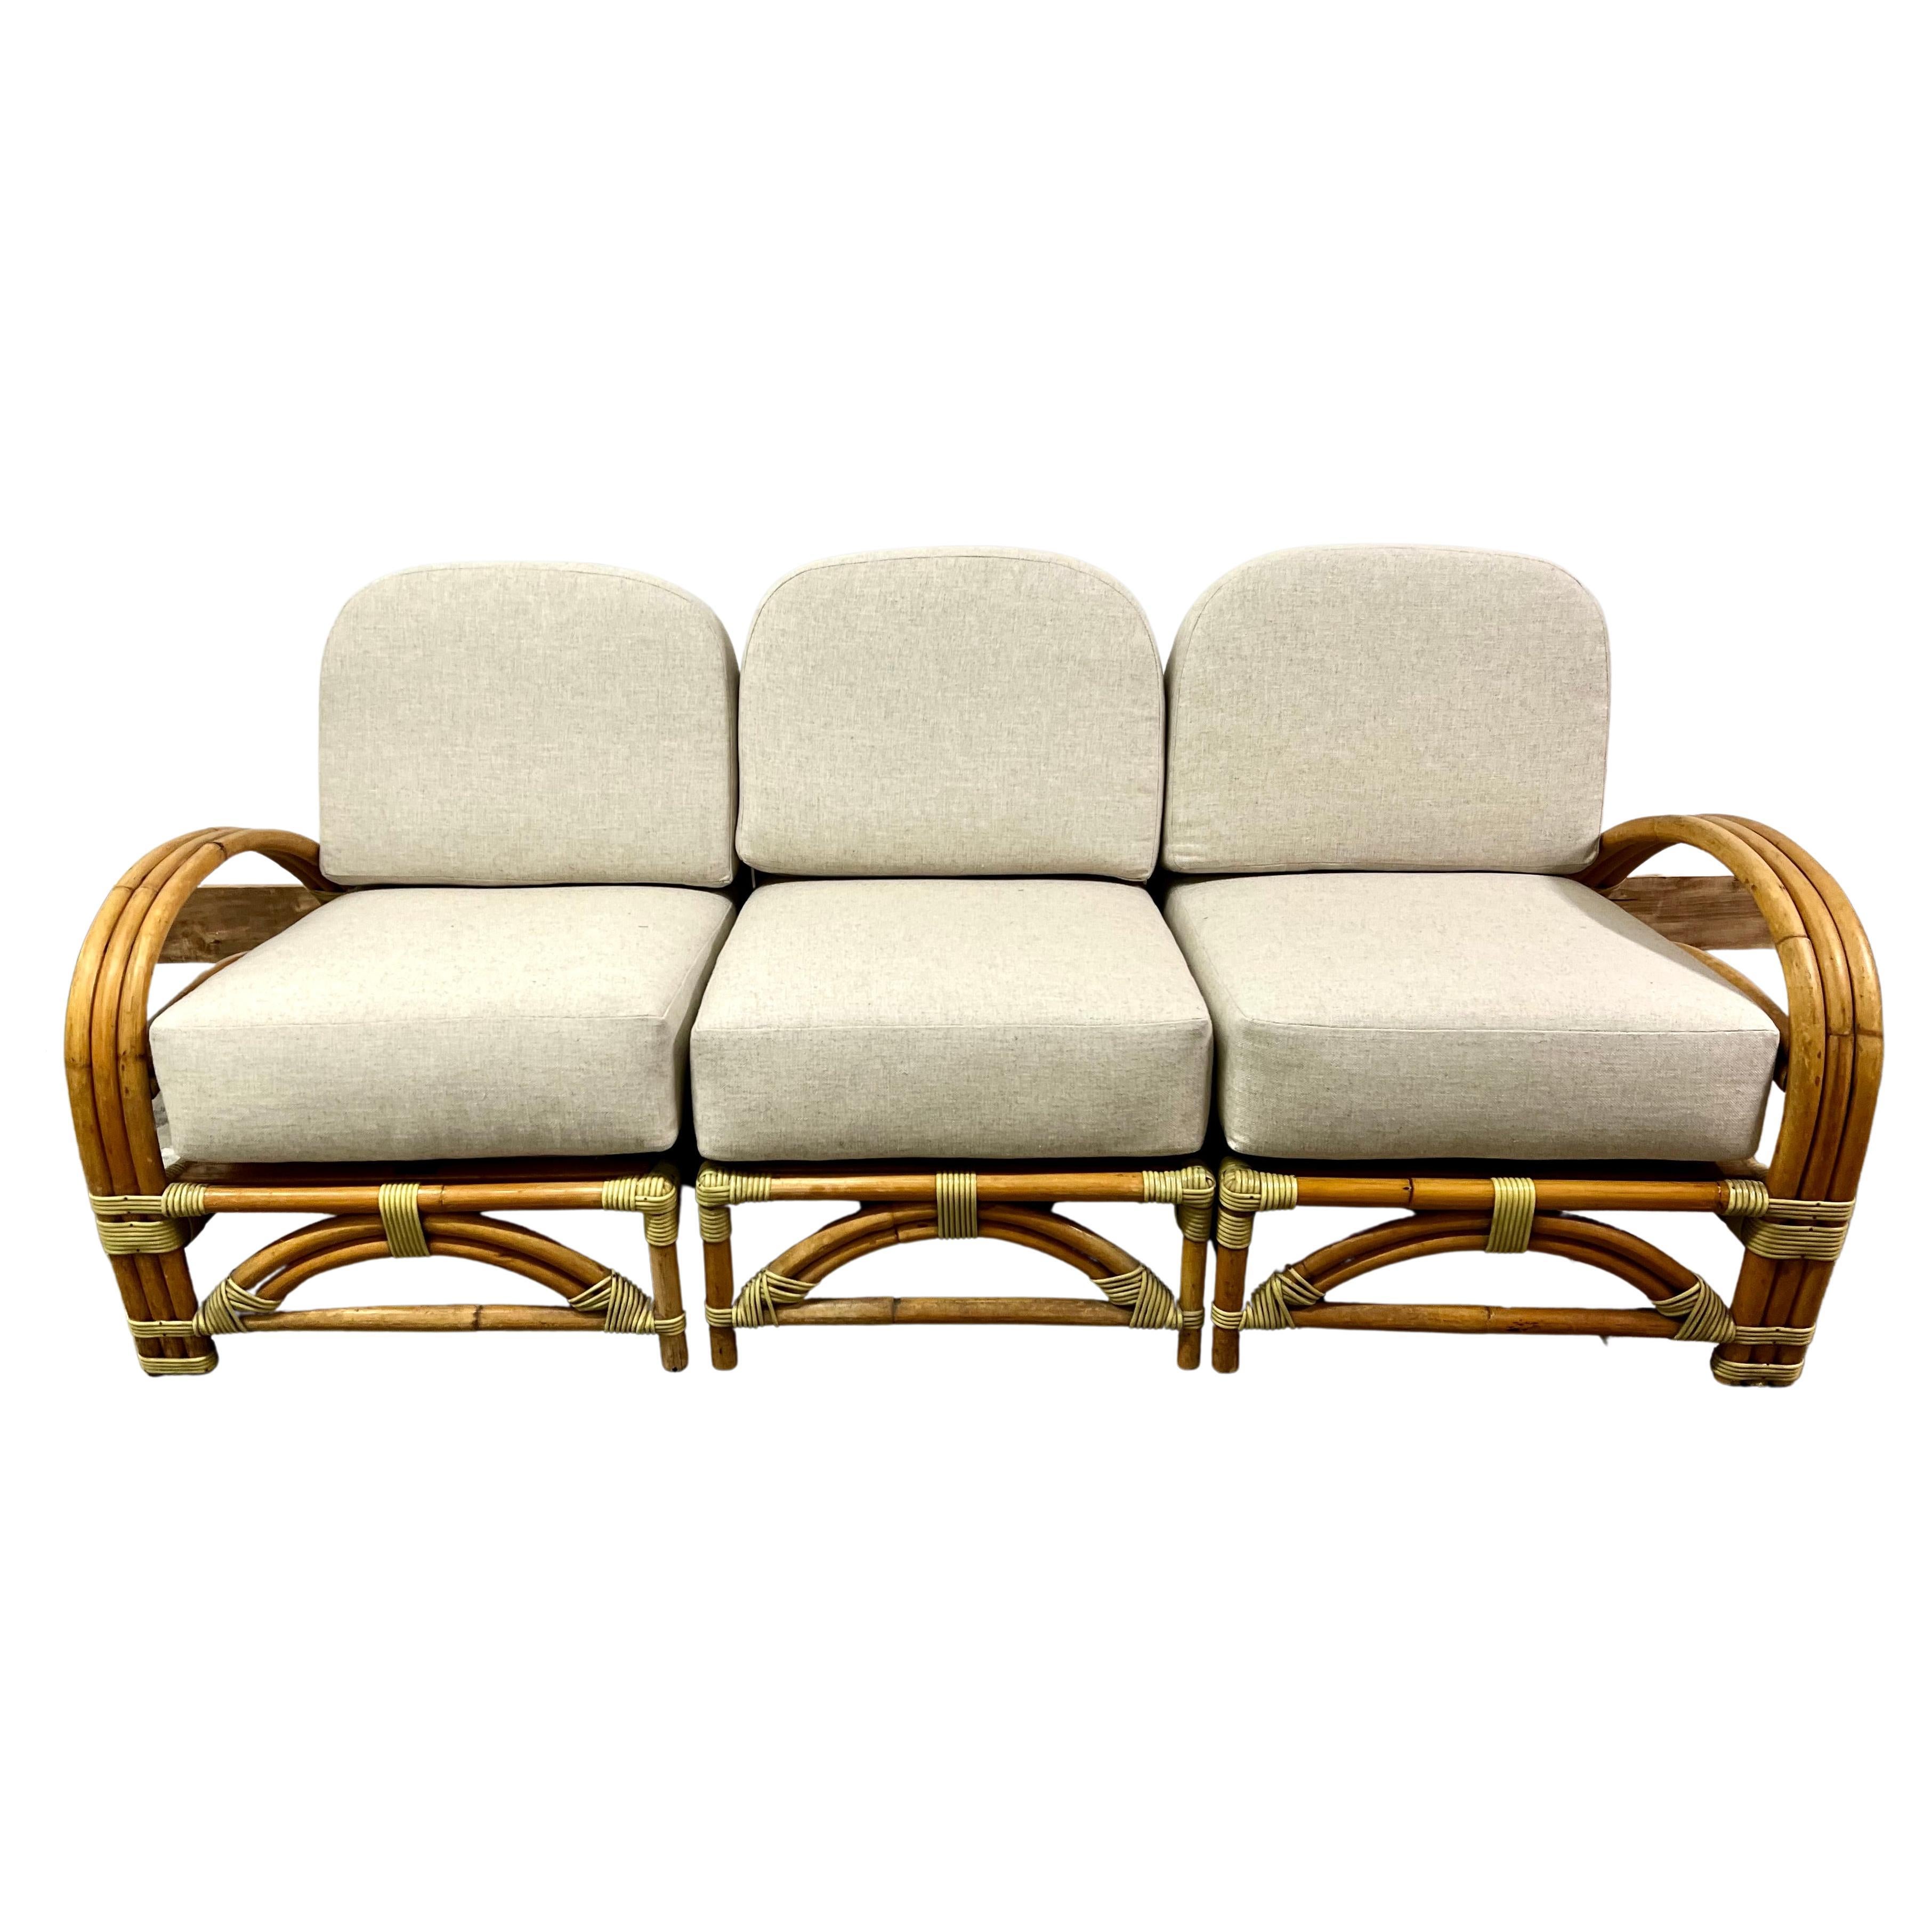 Ritts So. Rattan Sofa with Custom Upholstery For Sale at 1stDibs